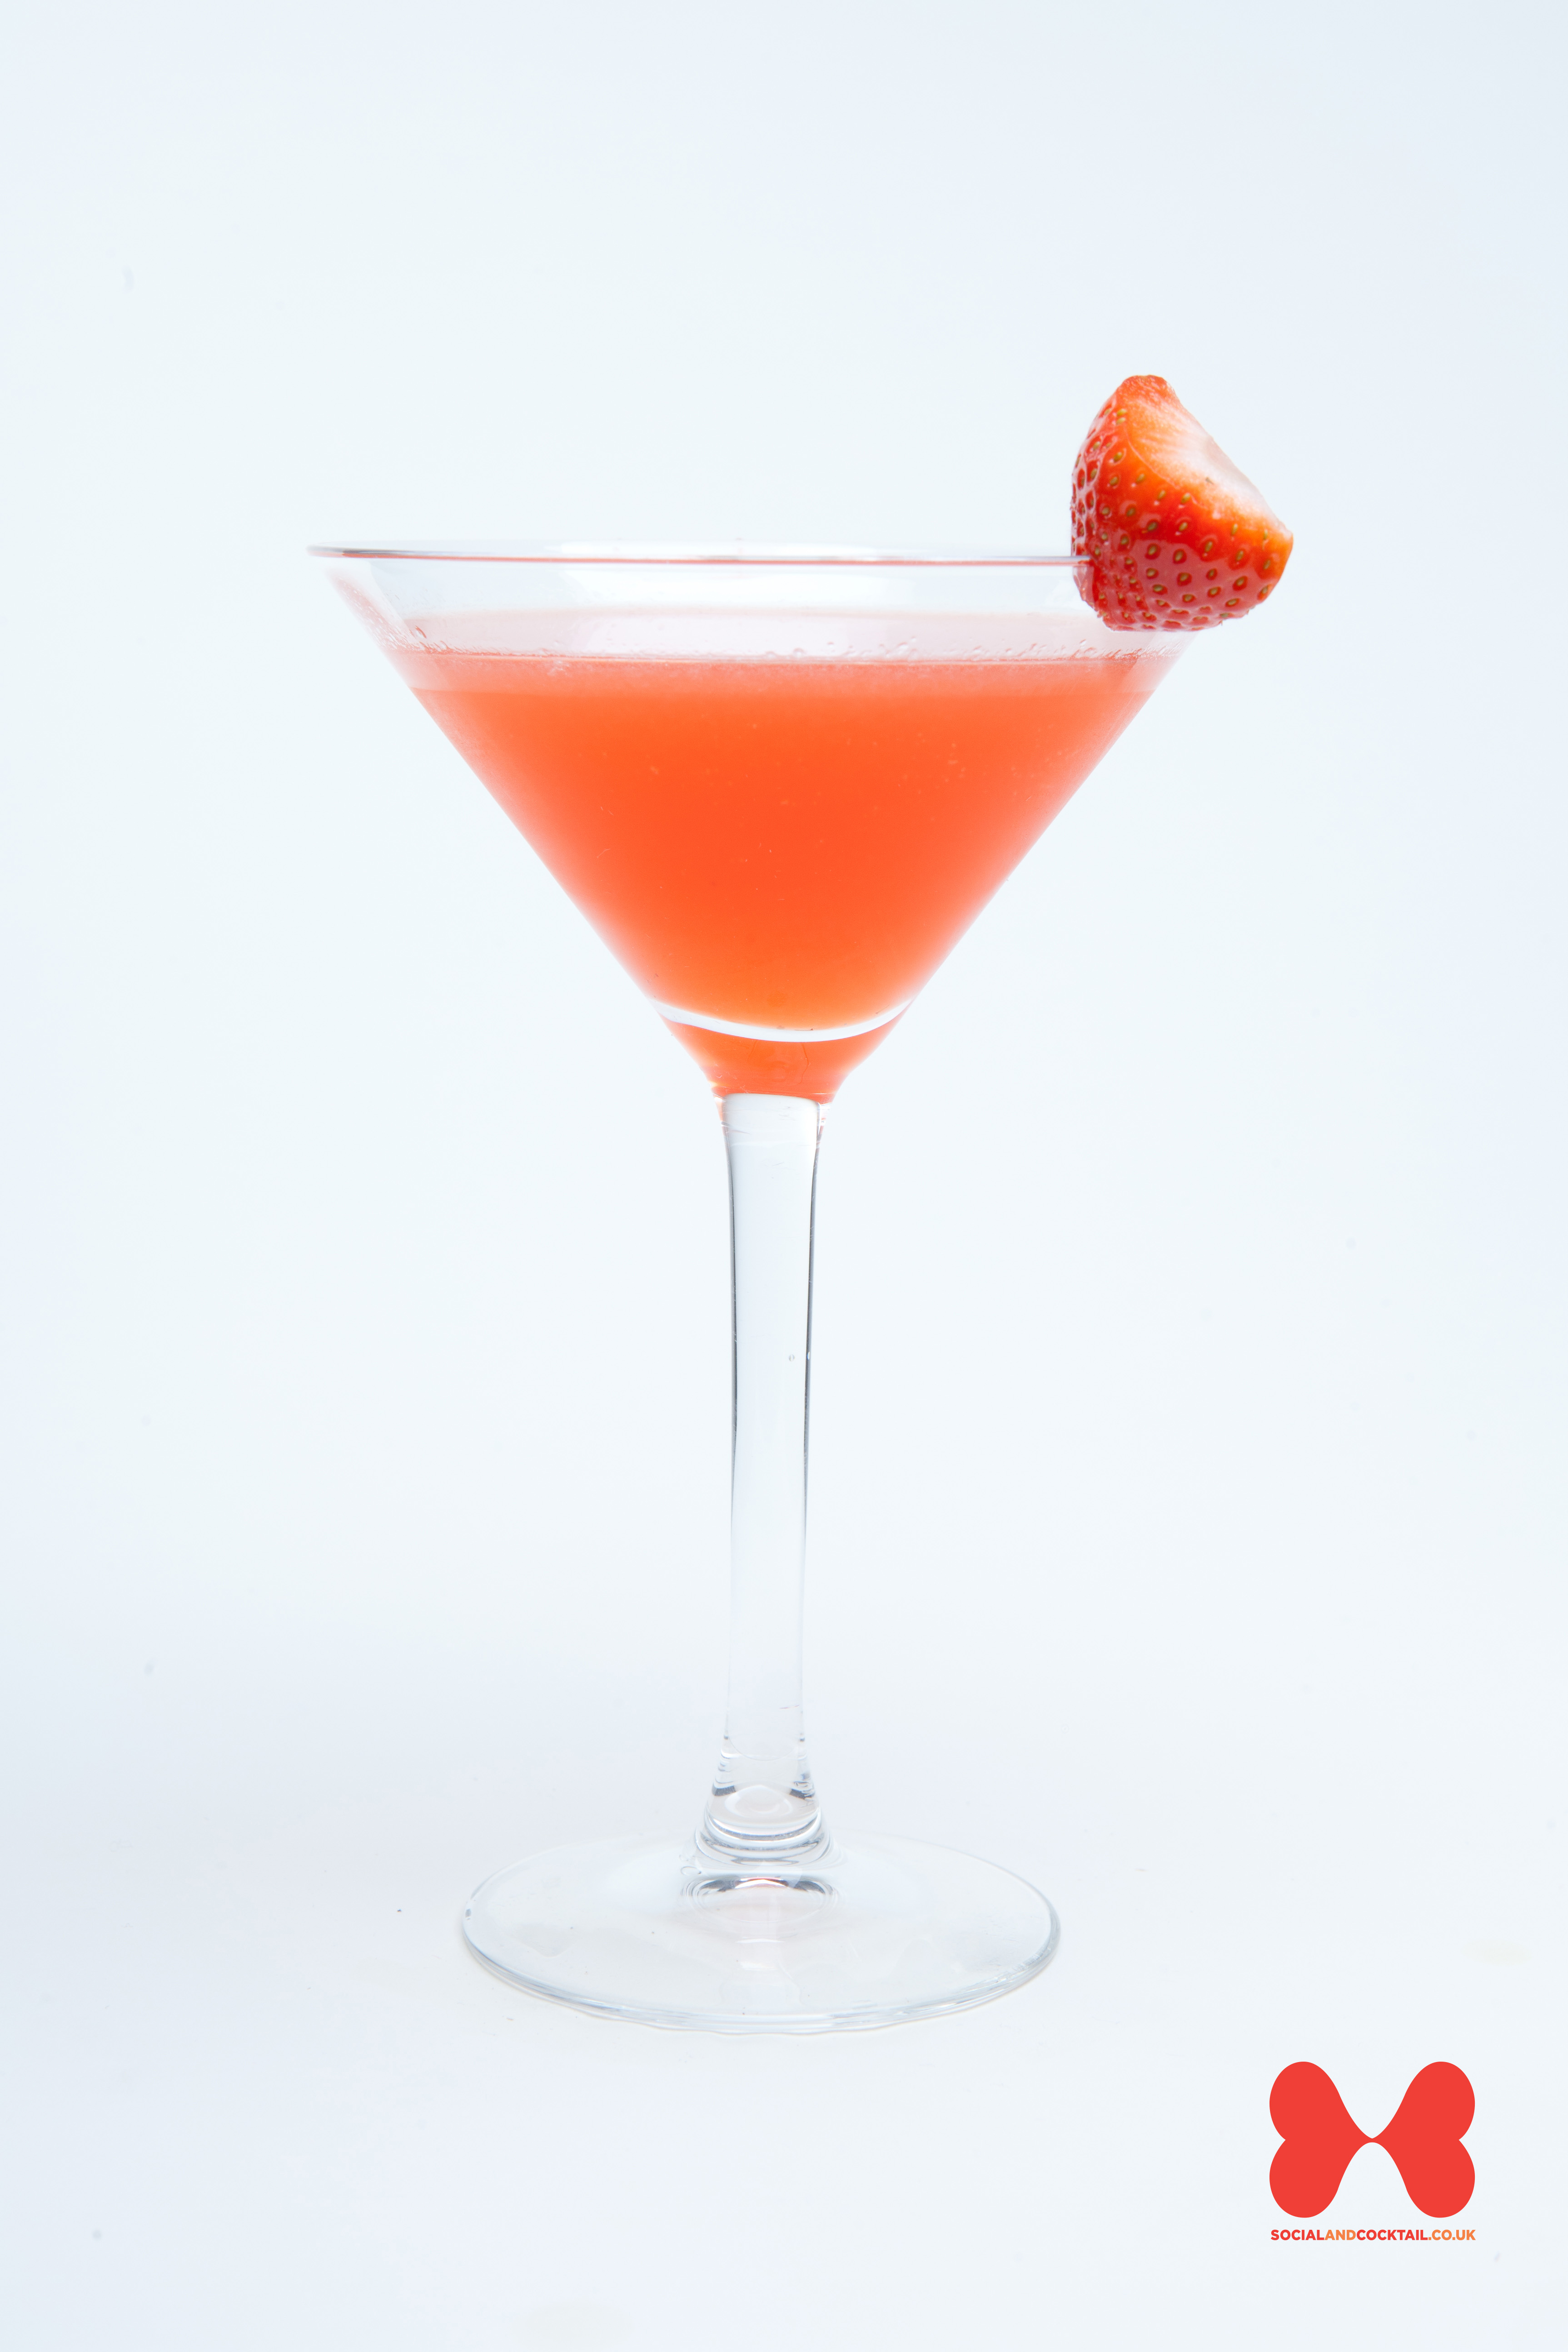 Drink recipes: 32000 mixed drink alcohol cocktail recipes